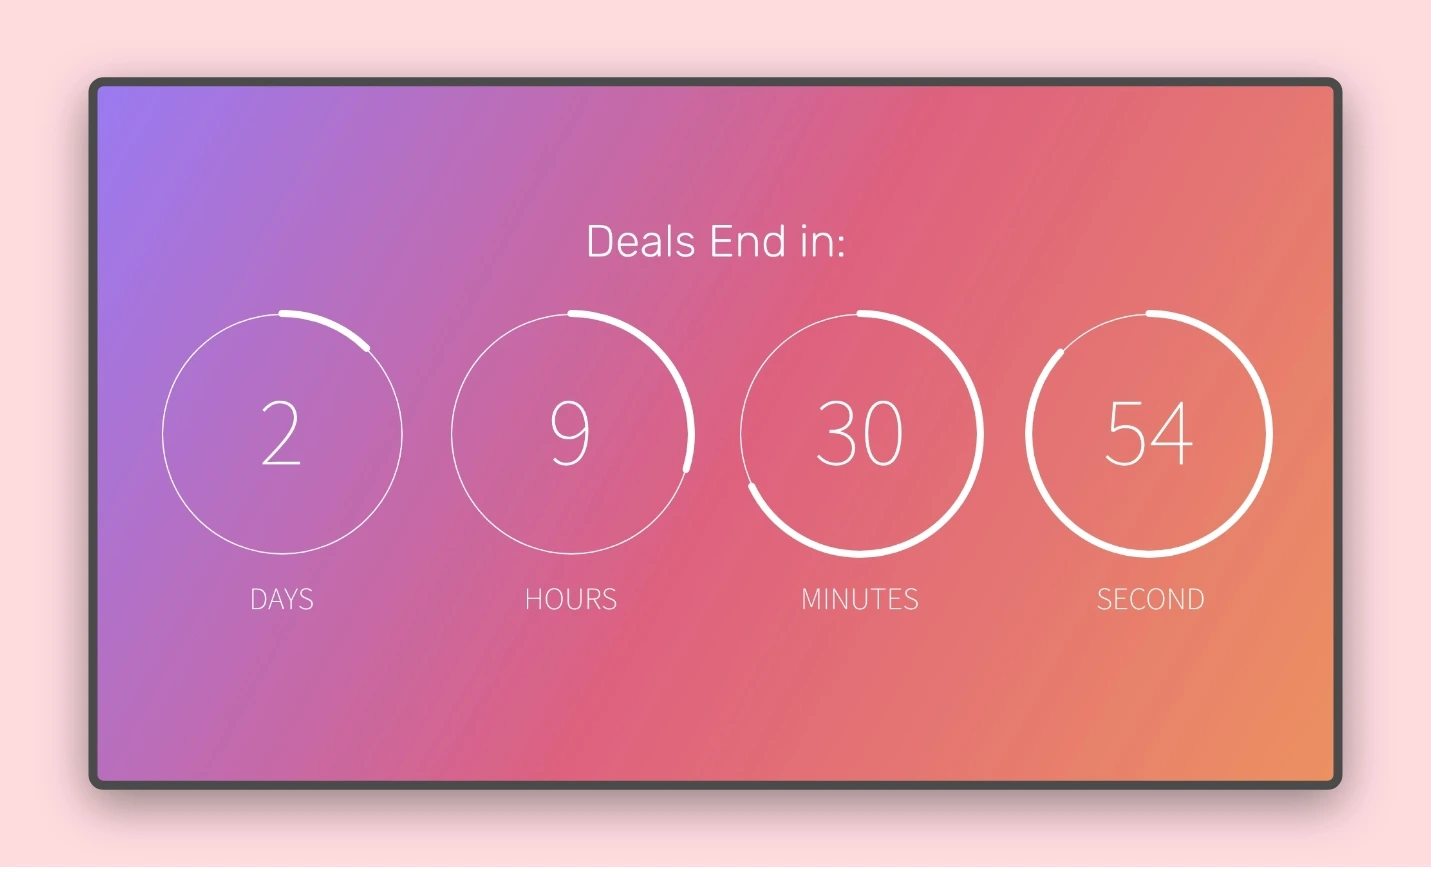 Countdown Timer app feed preview showing timer along custom text as Deals End in.